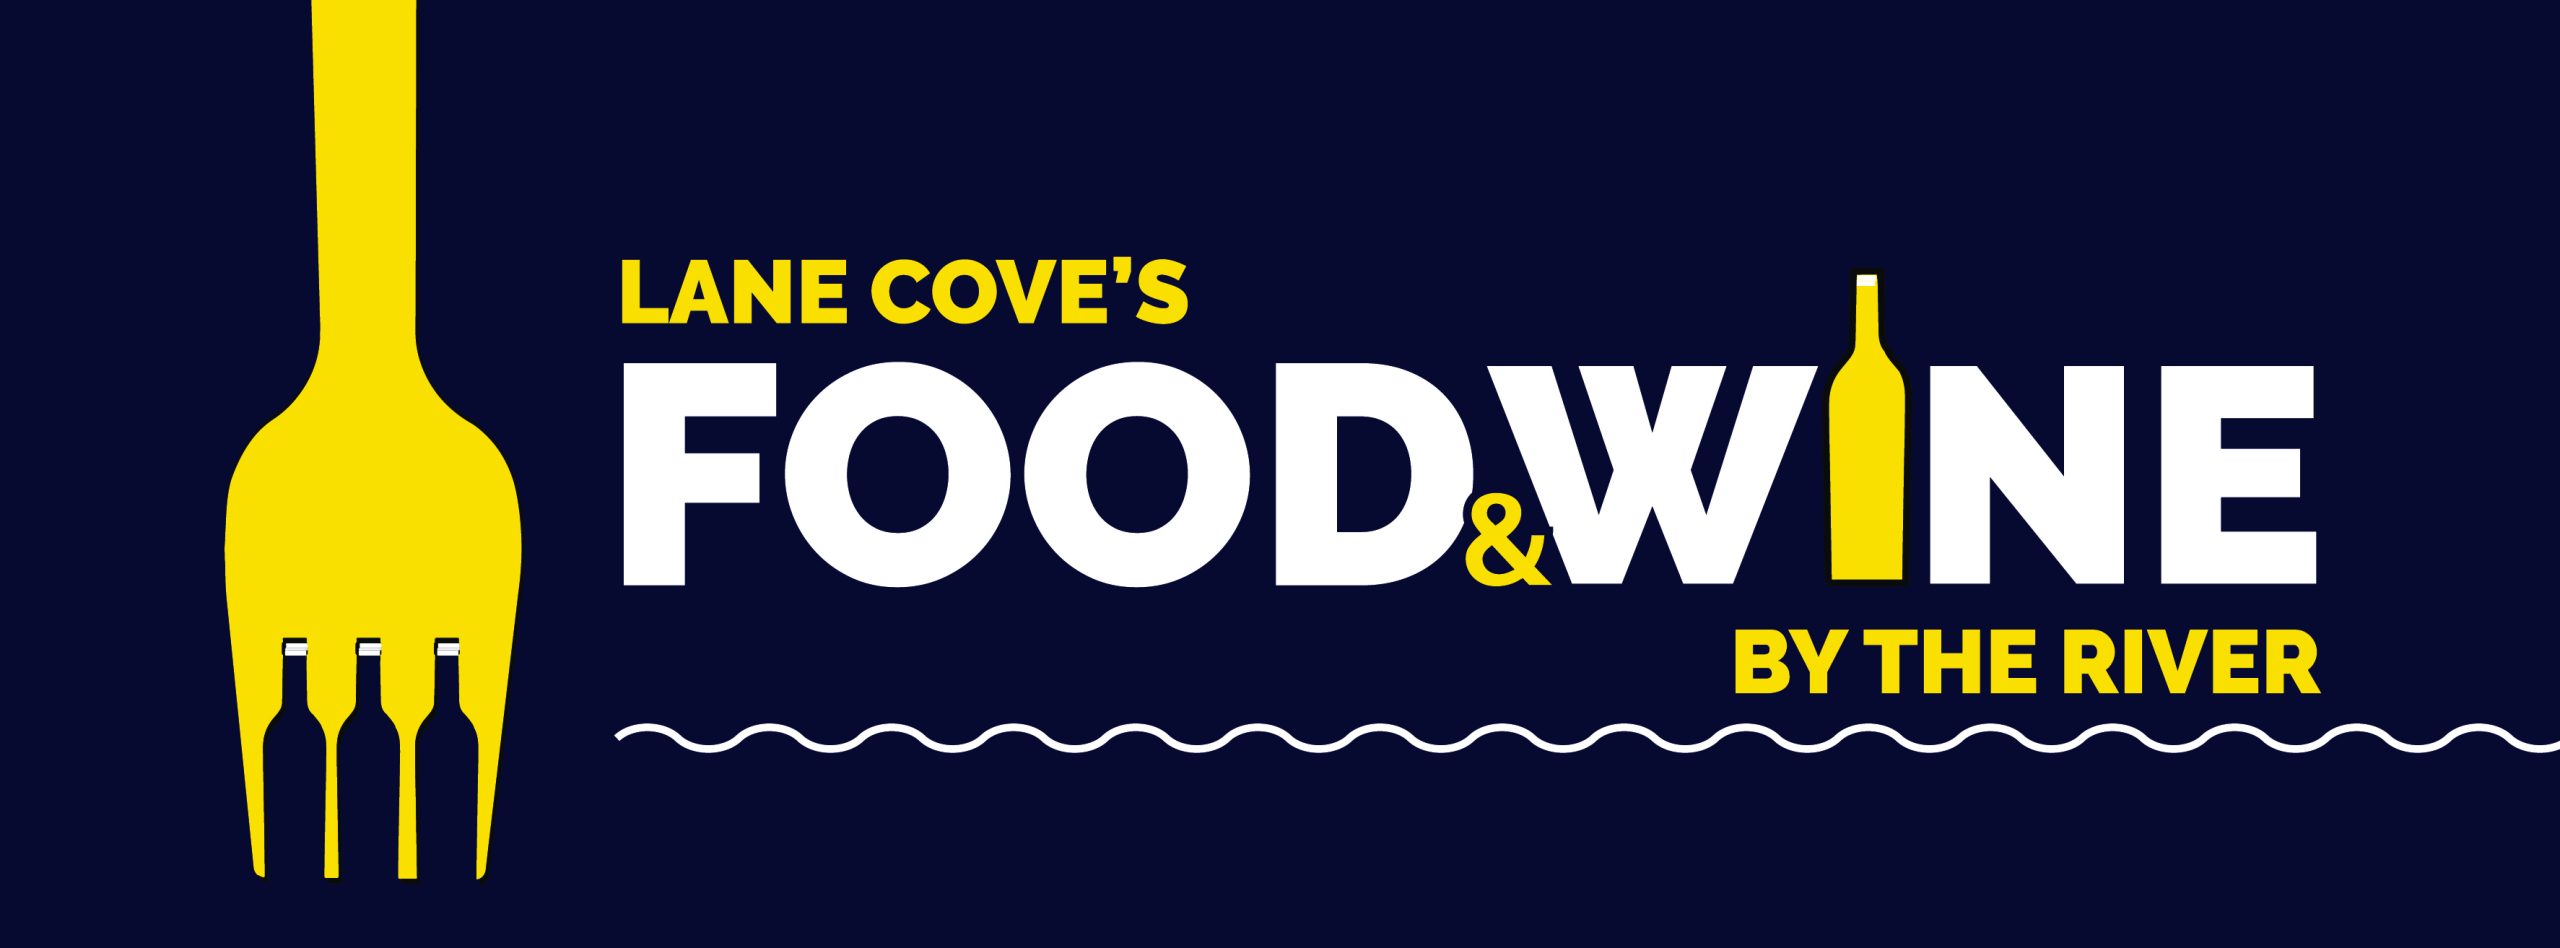 Lane Cove's Food and Wine by the River